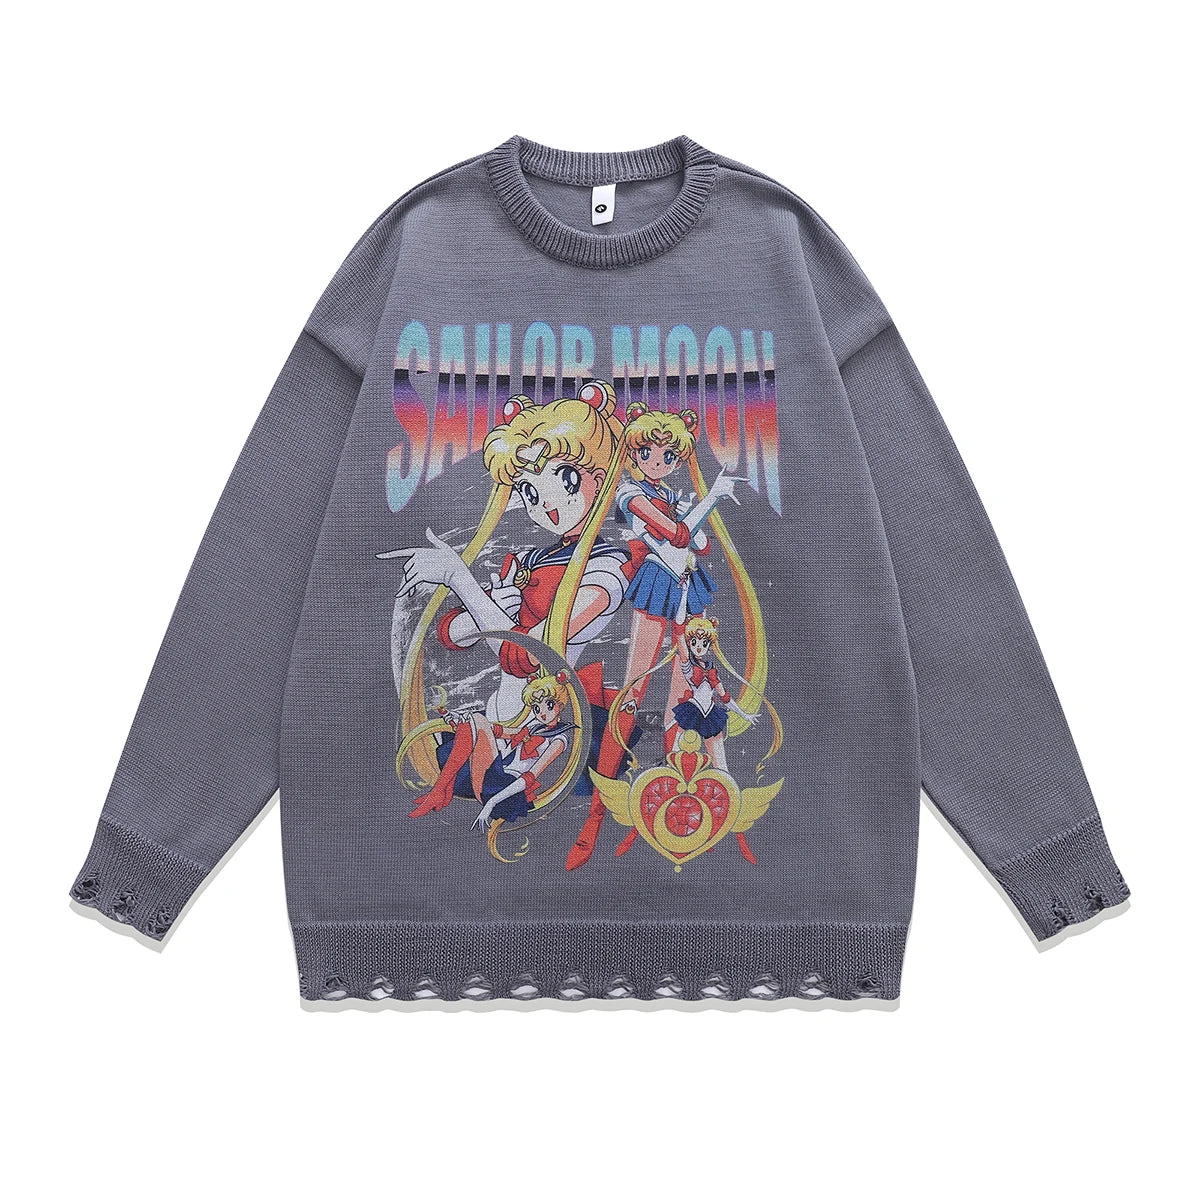 Anime New Jeans Sweater Grey 3